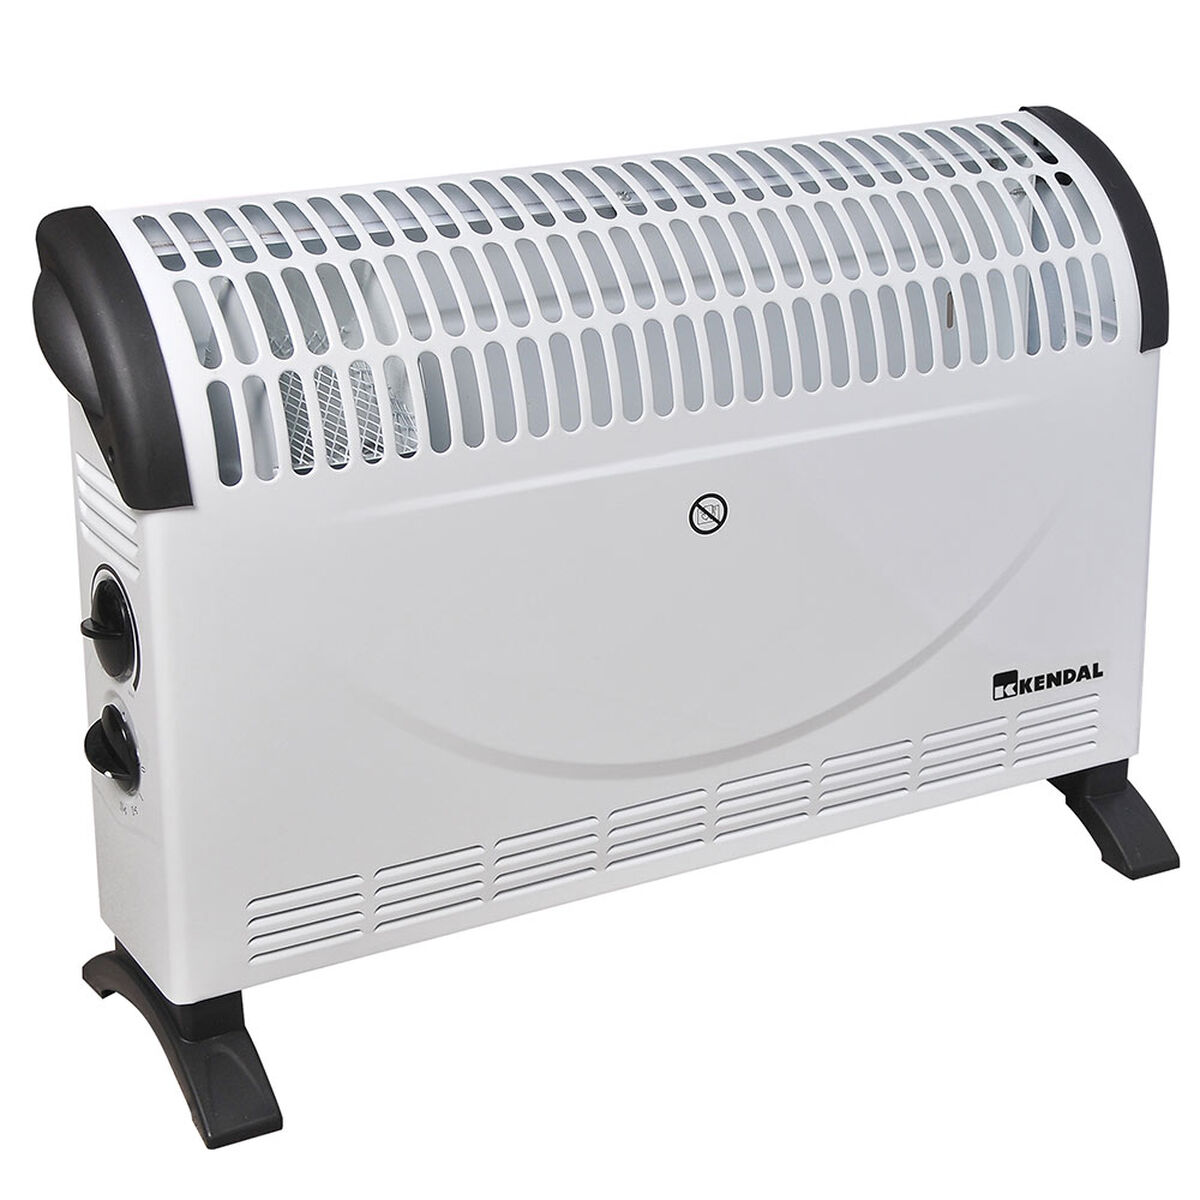 Turbo Convector Kendal KC2000 2000W